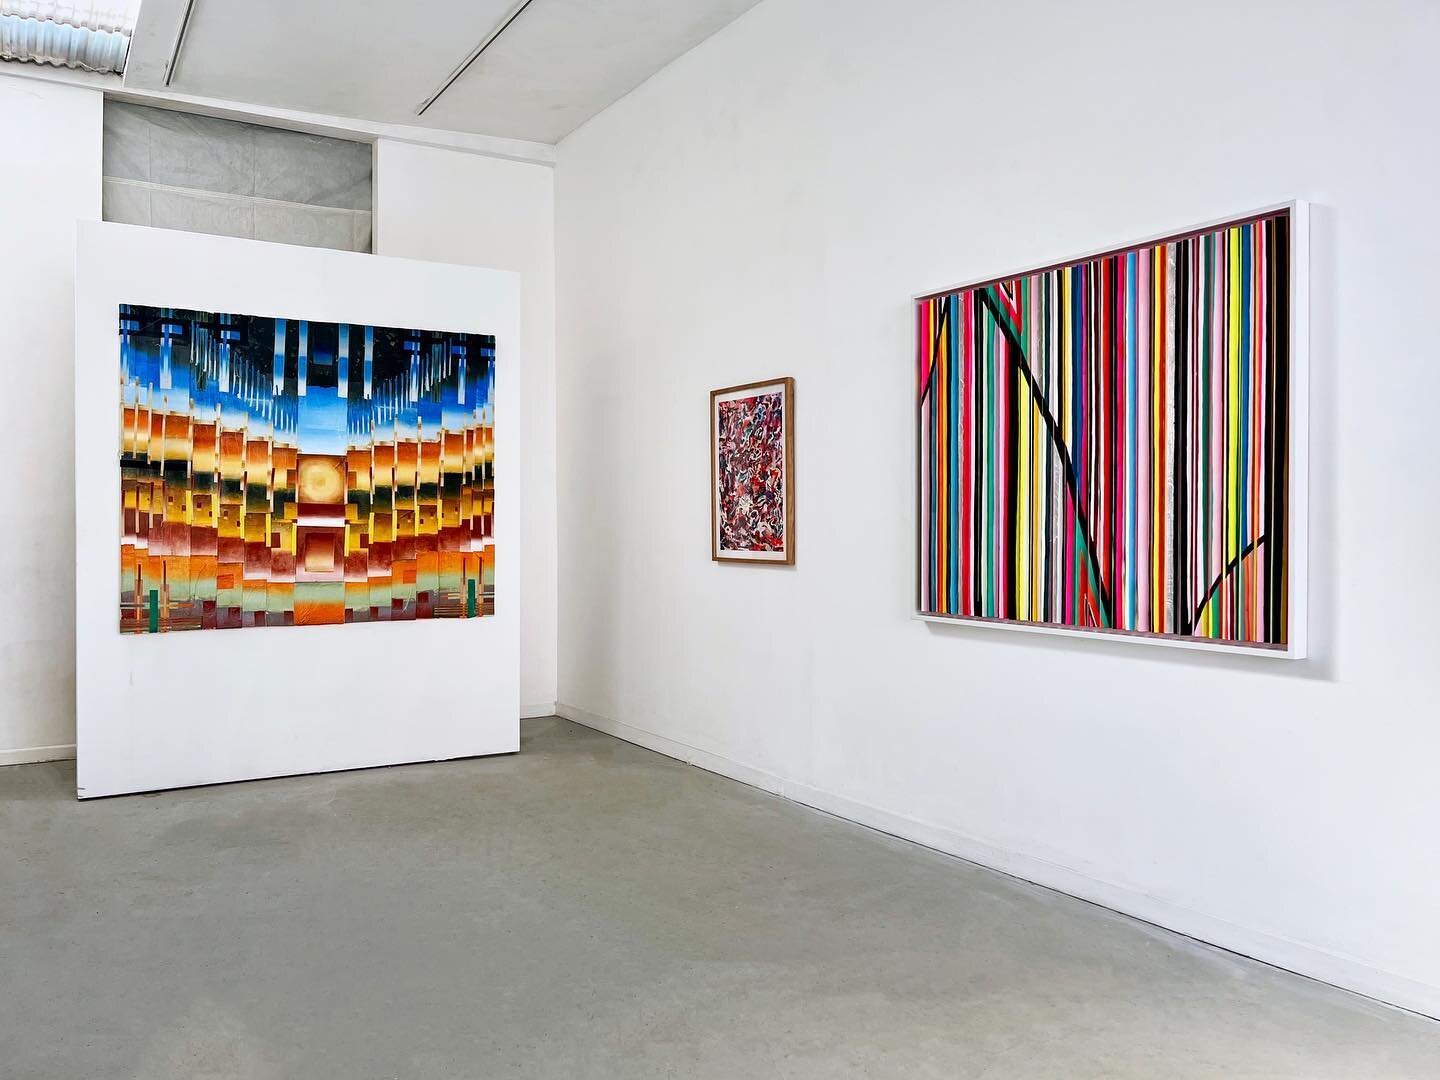 On view: &lsquo;RHYTHM CHANGES&rsquo;, featuring work by Jack Arthur Wood, Michael Hambouz, and Wesley Ware. The show includes Wood&rsquo;s multimedia paintings, featuring intricate layering of painted and collaged surfaces, Hambouz&rsquo;s three-dim